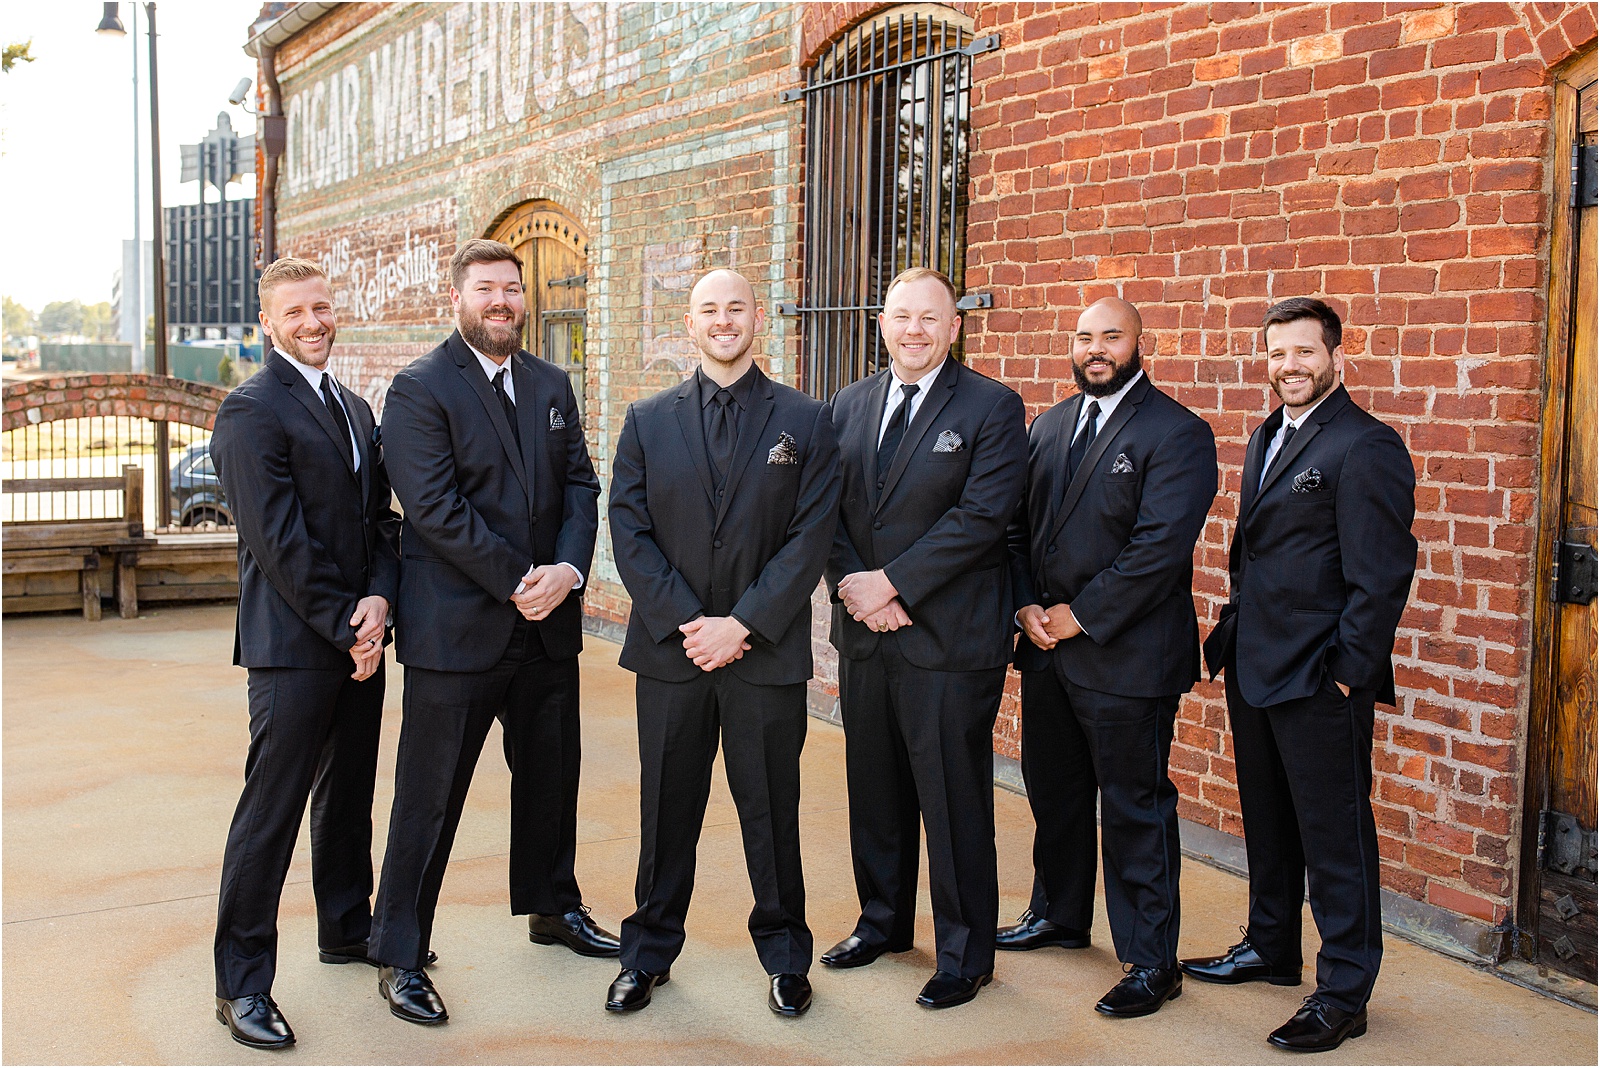 Groom and friends lined up outside warehouse venue in Greenville, SC